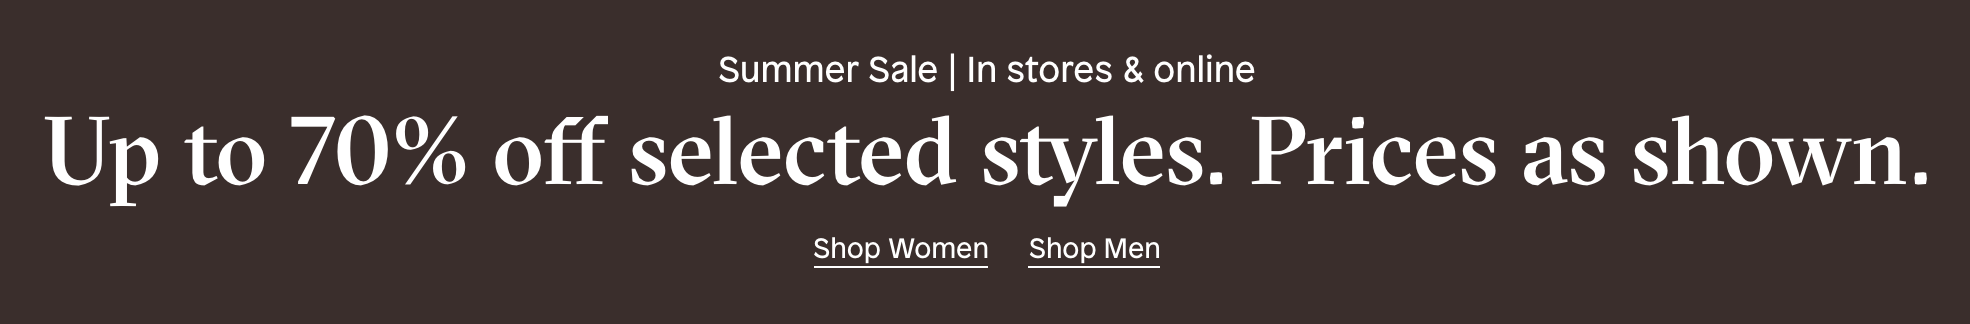 Aldo Shoes Aldo Shoes: Sale up to 70% off selected shoes styles